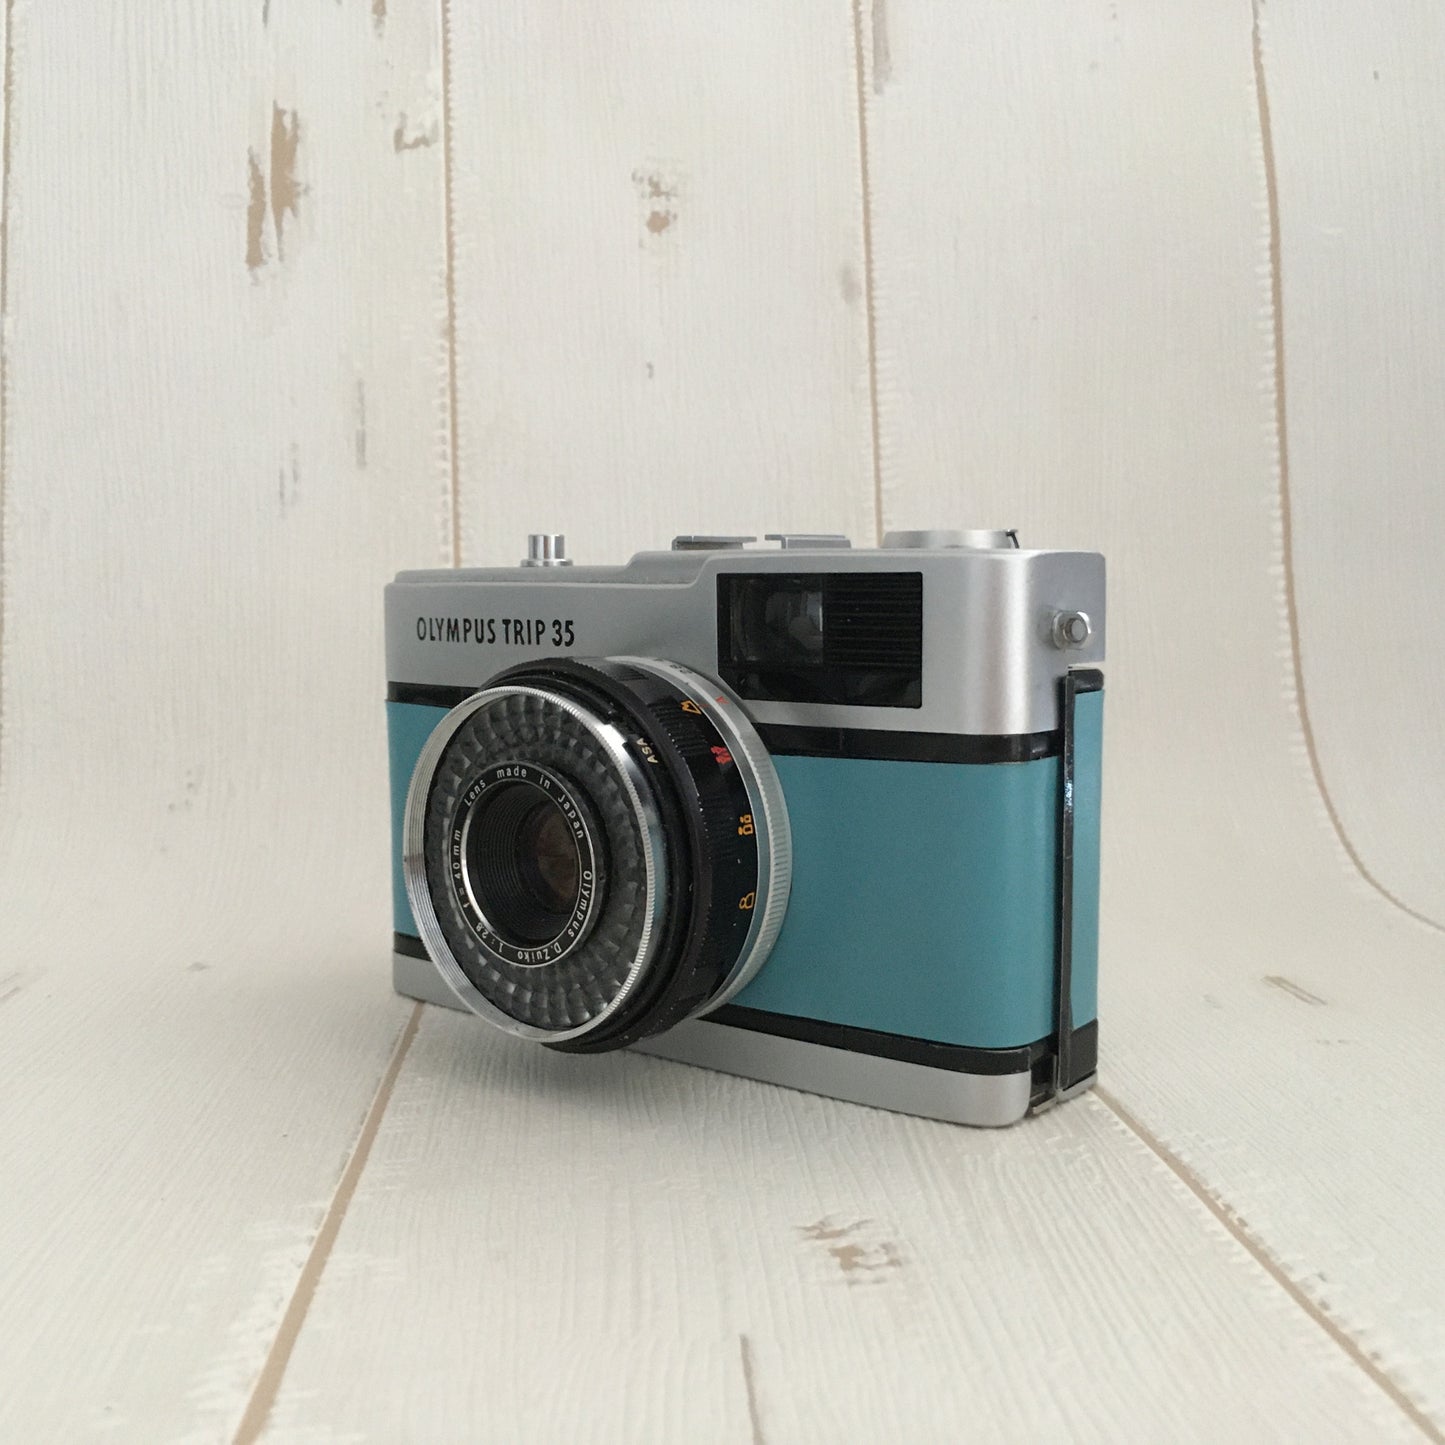 Olympus TRIP35  with saxe blue leather